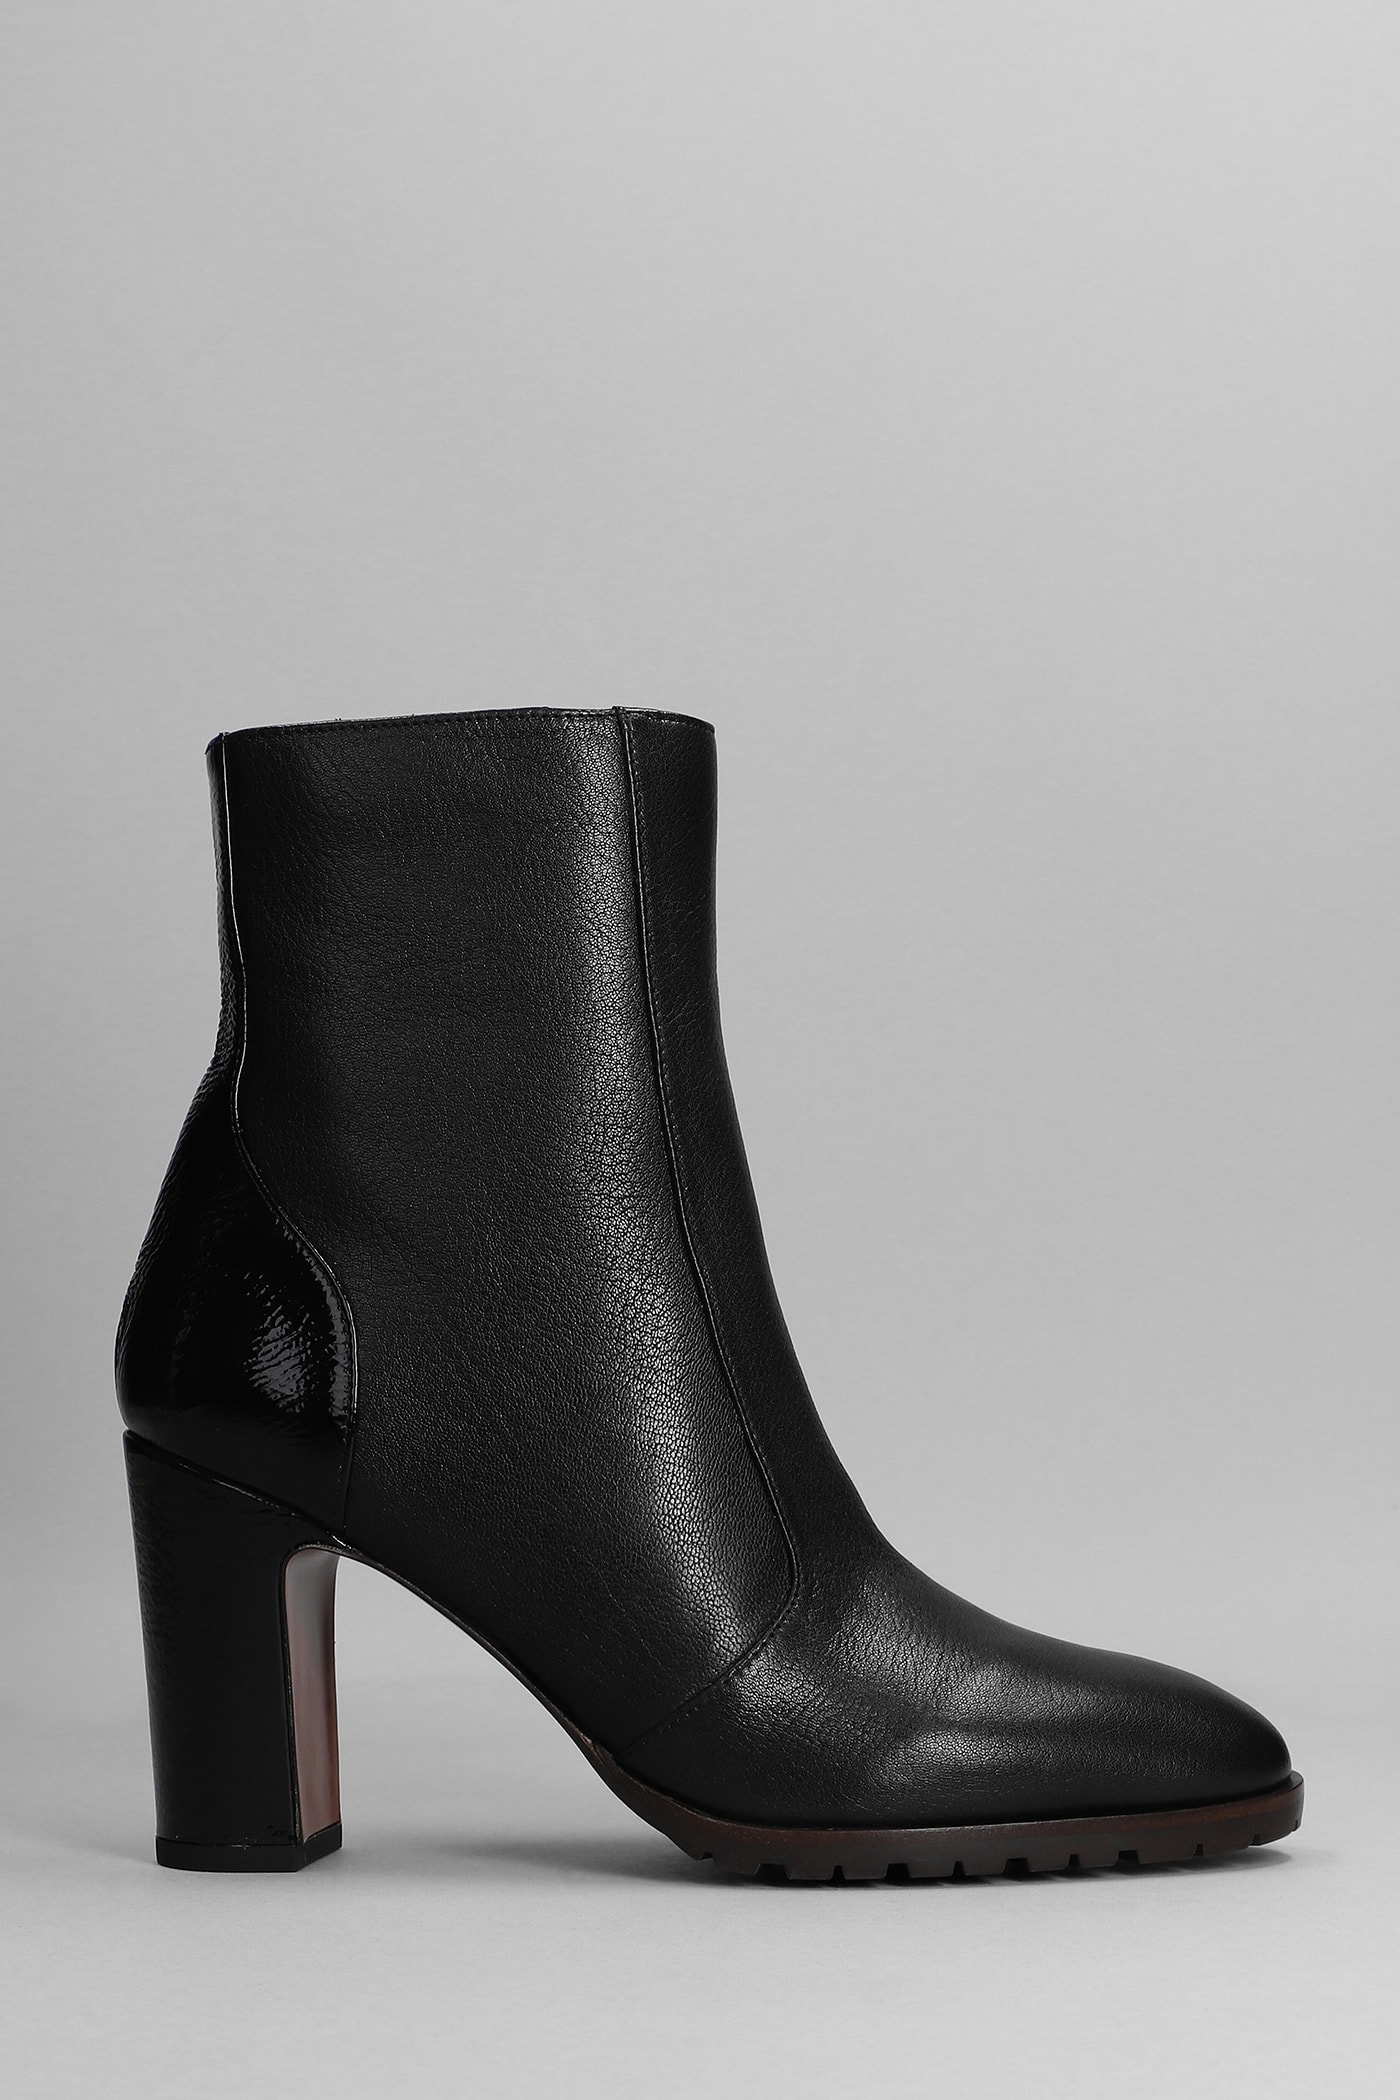 Chie Mihara Elmi High Heels Ankle Boots In Black Leather